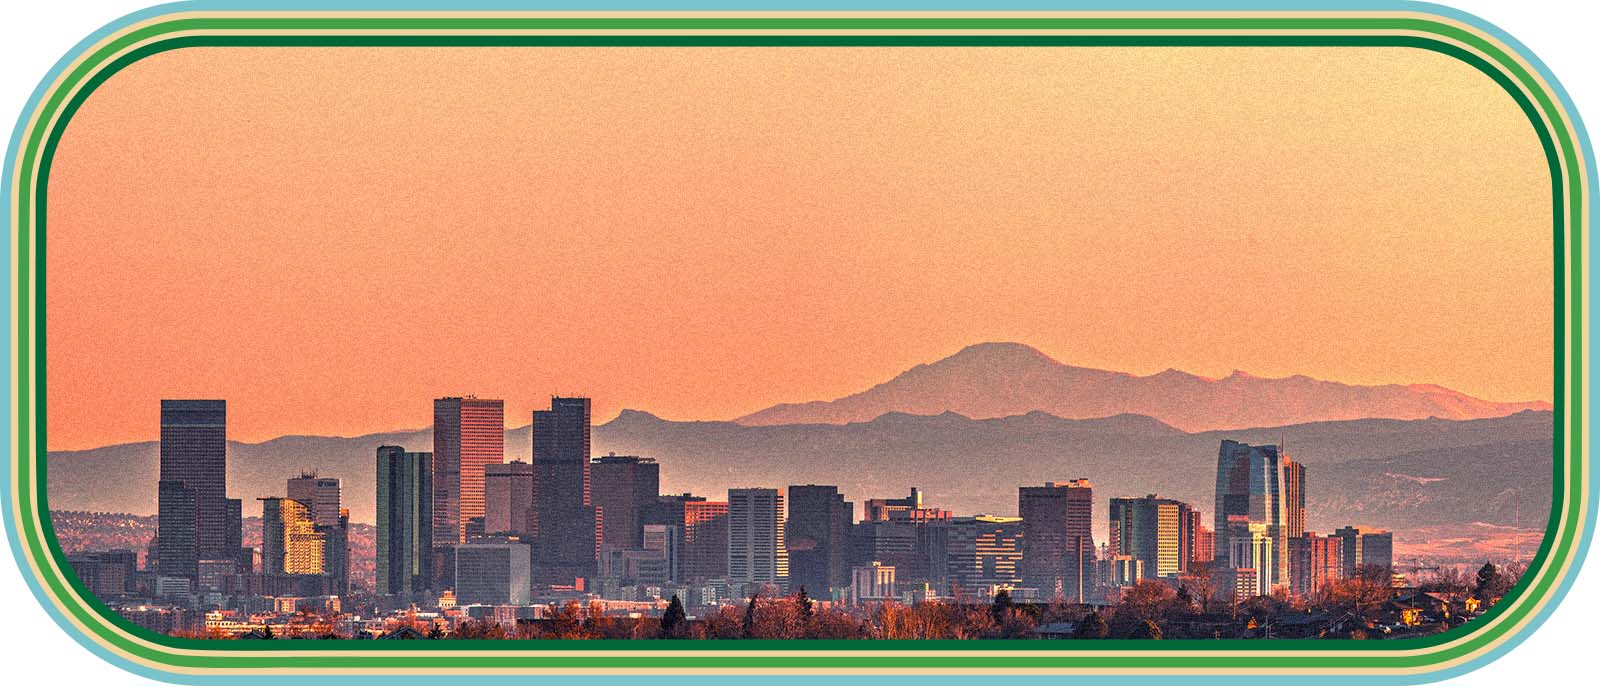 Denver City Skyline with Mountains in Background and Trees in Foreground at Sunset with LivWell Branded Retro Border